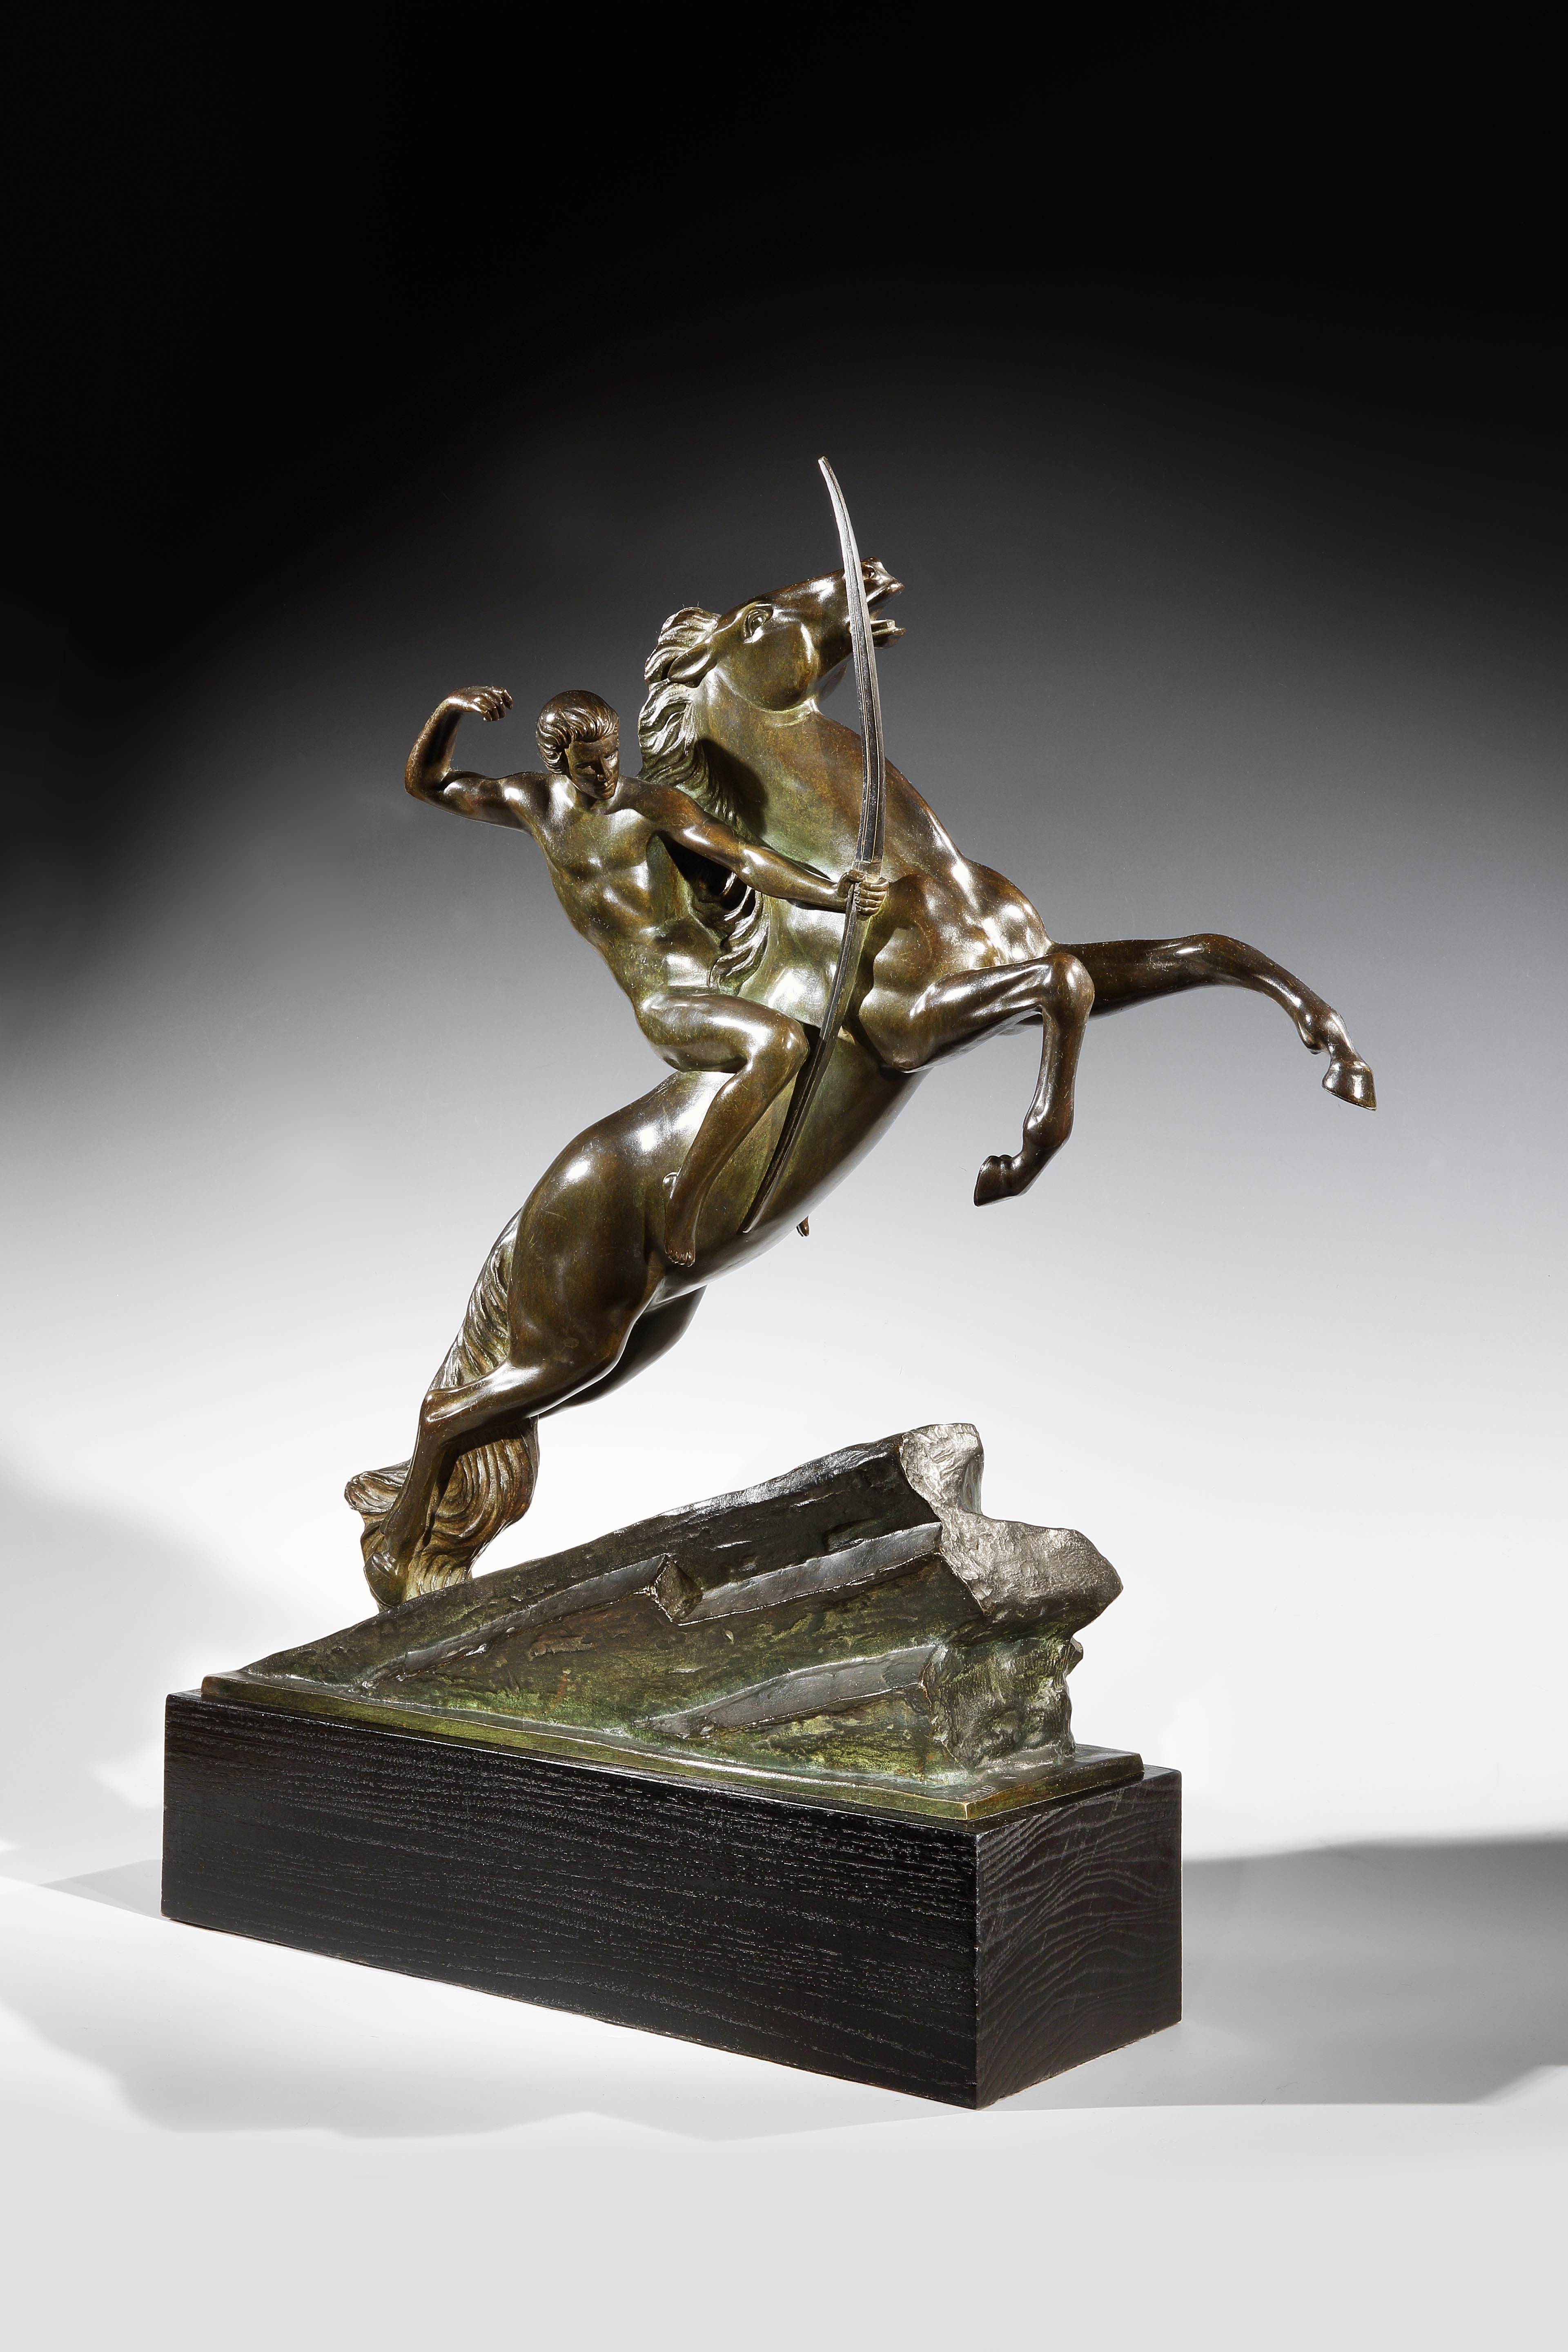 Armand Lemo, (French, 1881-1936).

A fine modernist Art Deco bronze, modeled as a stylized Archer with bow on horseback, the horse rearing up on a sloping socle, the bronze mounted on a plain contemporary ebonized rectangular hardwood plinth. 